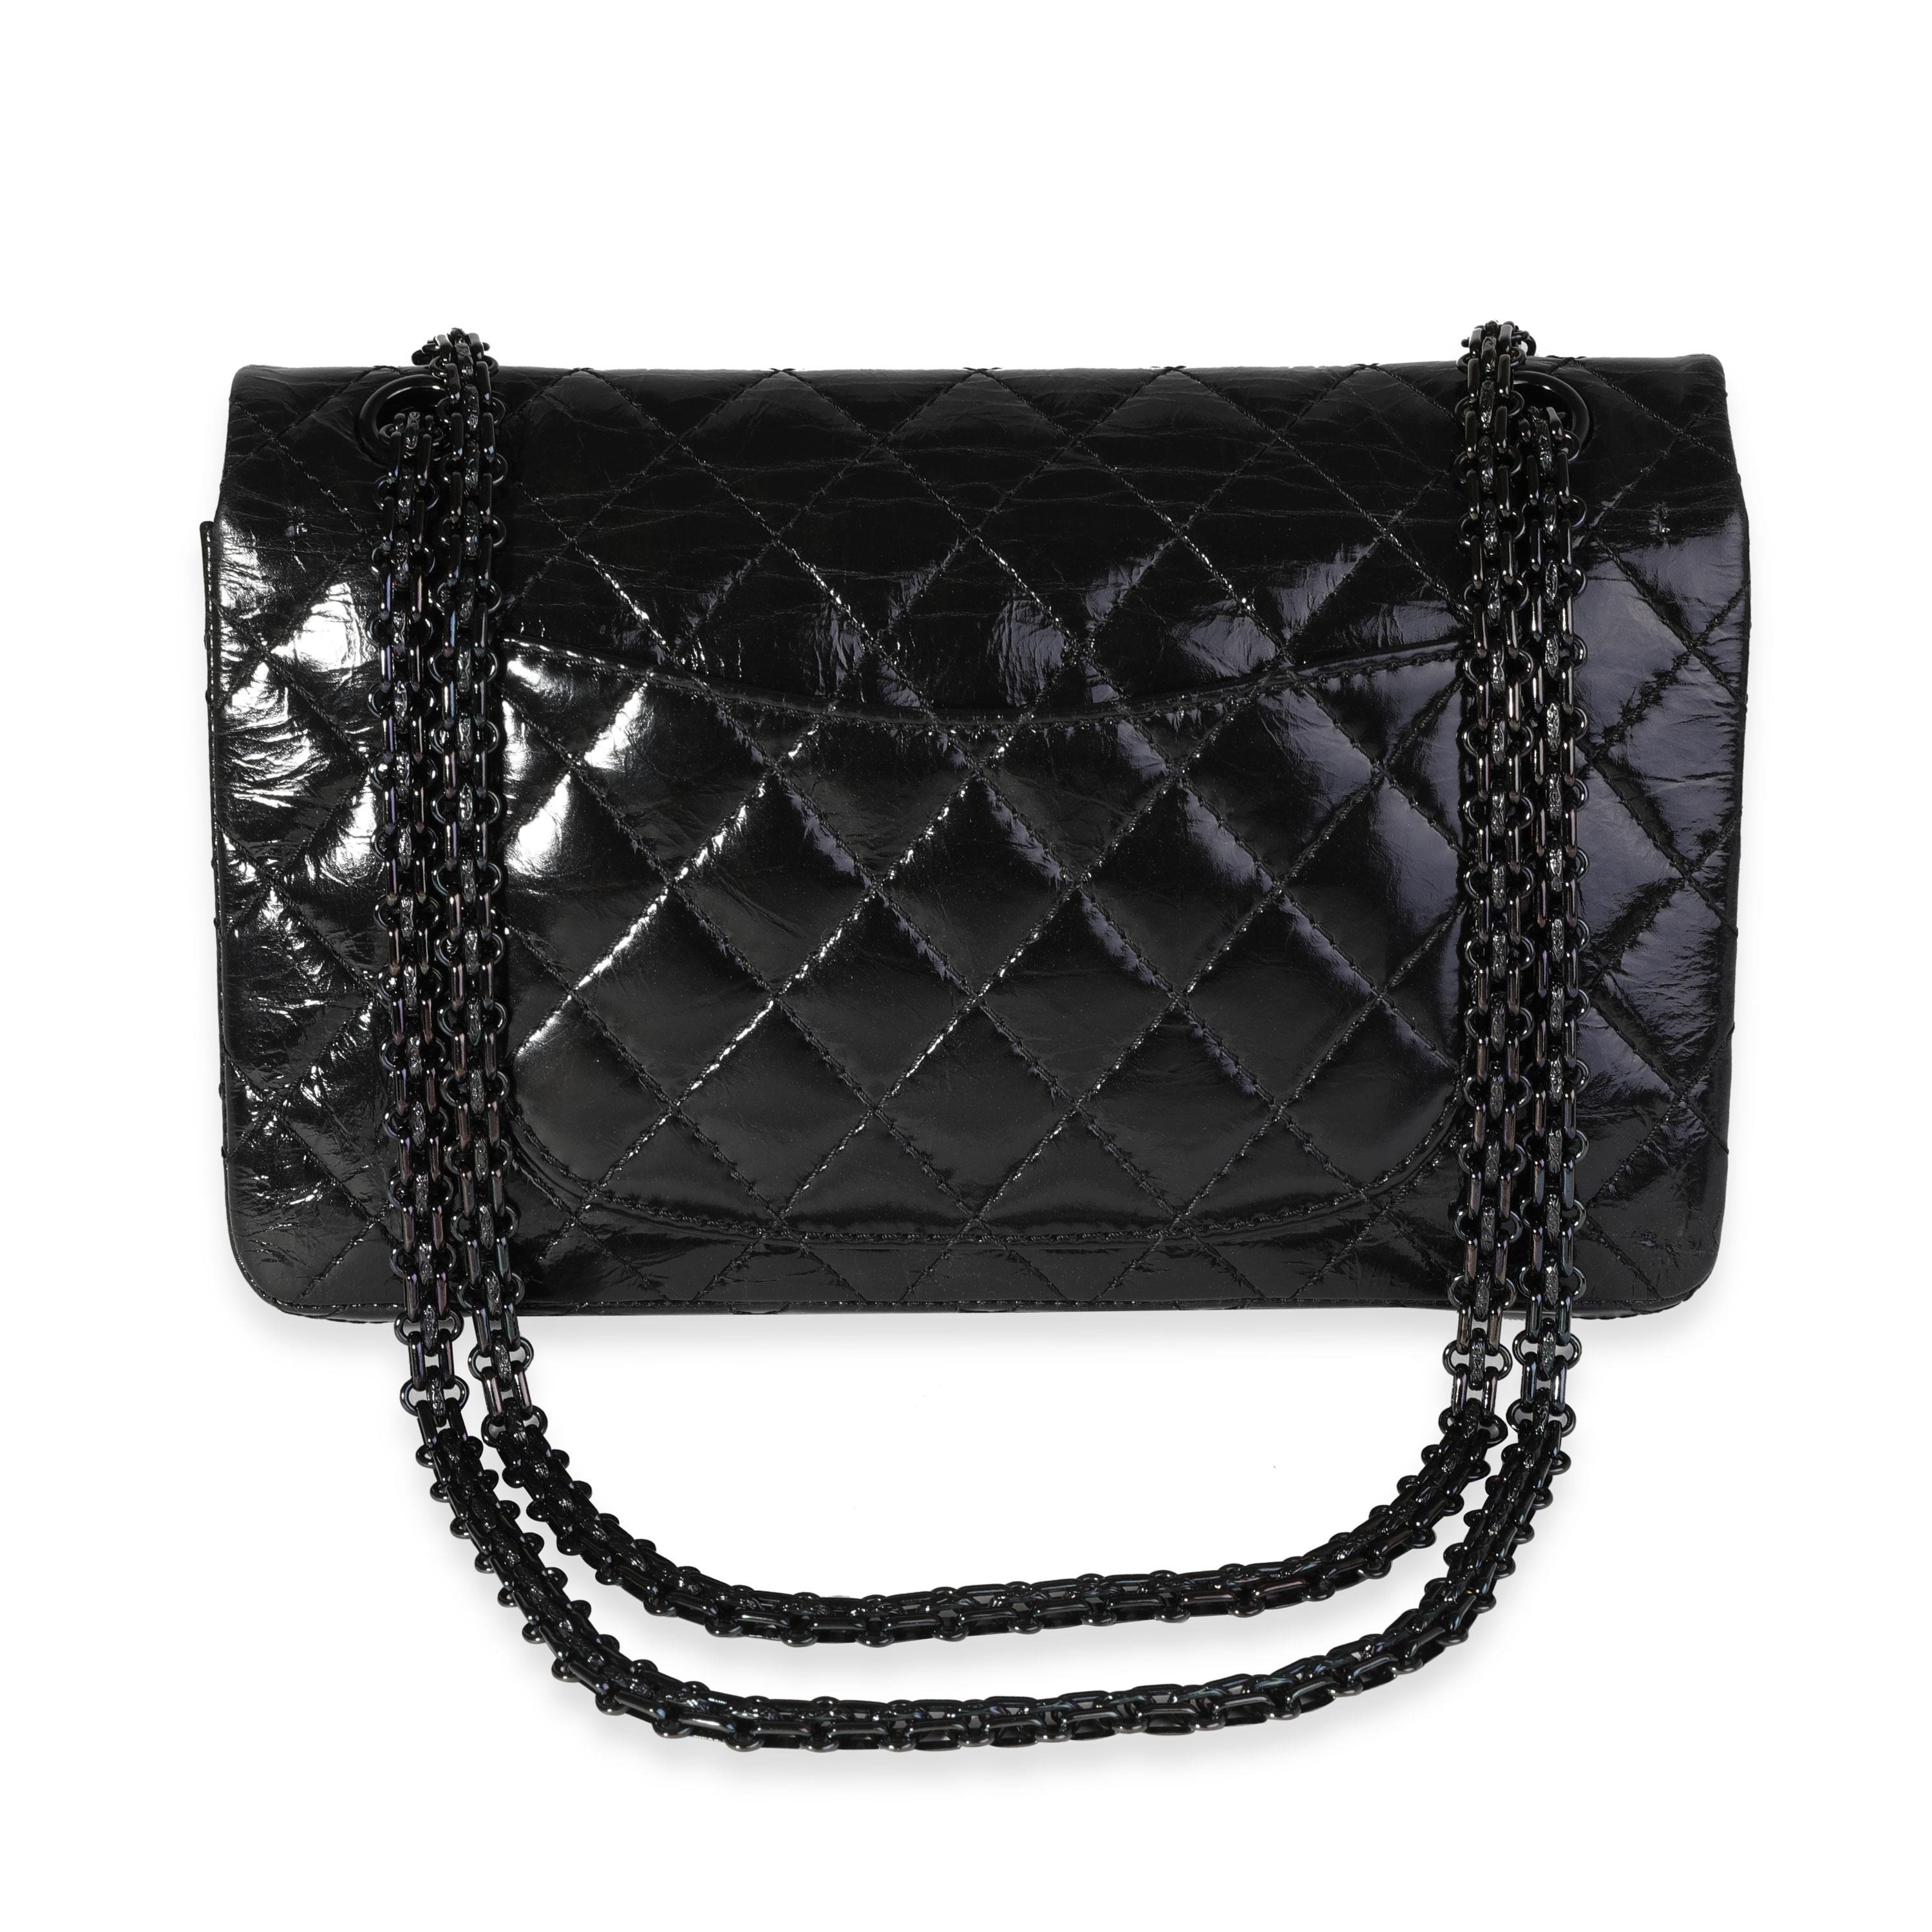 Chanel So Black Patent Crinkled Calfskin Reissue 2.55 225 Double Flap Bag In Good Condition In New York, NY